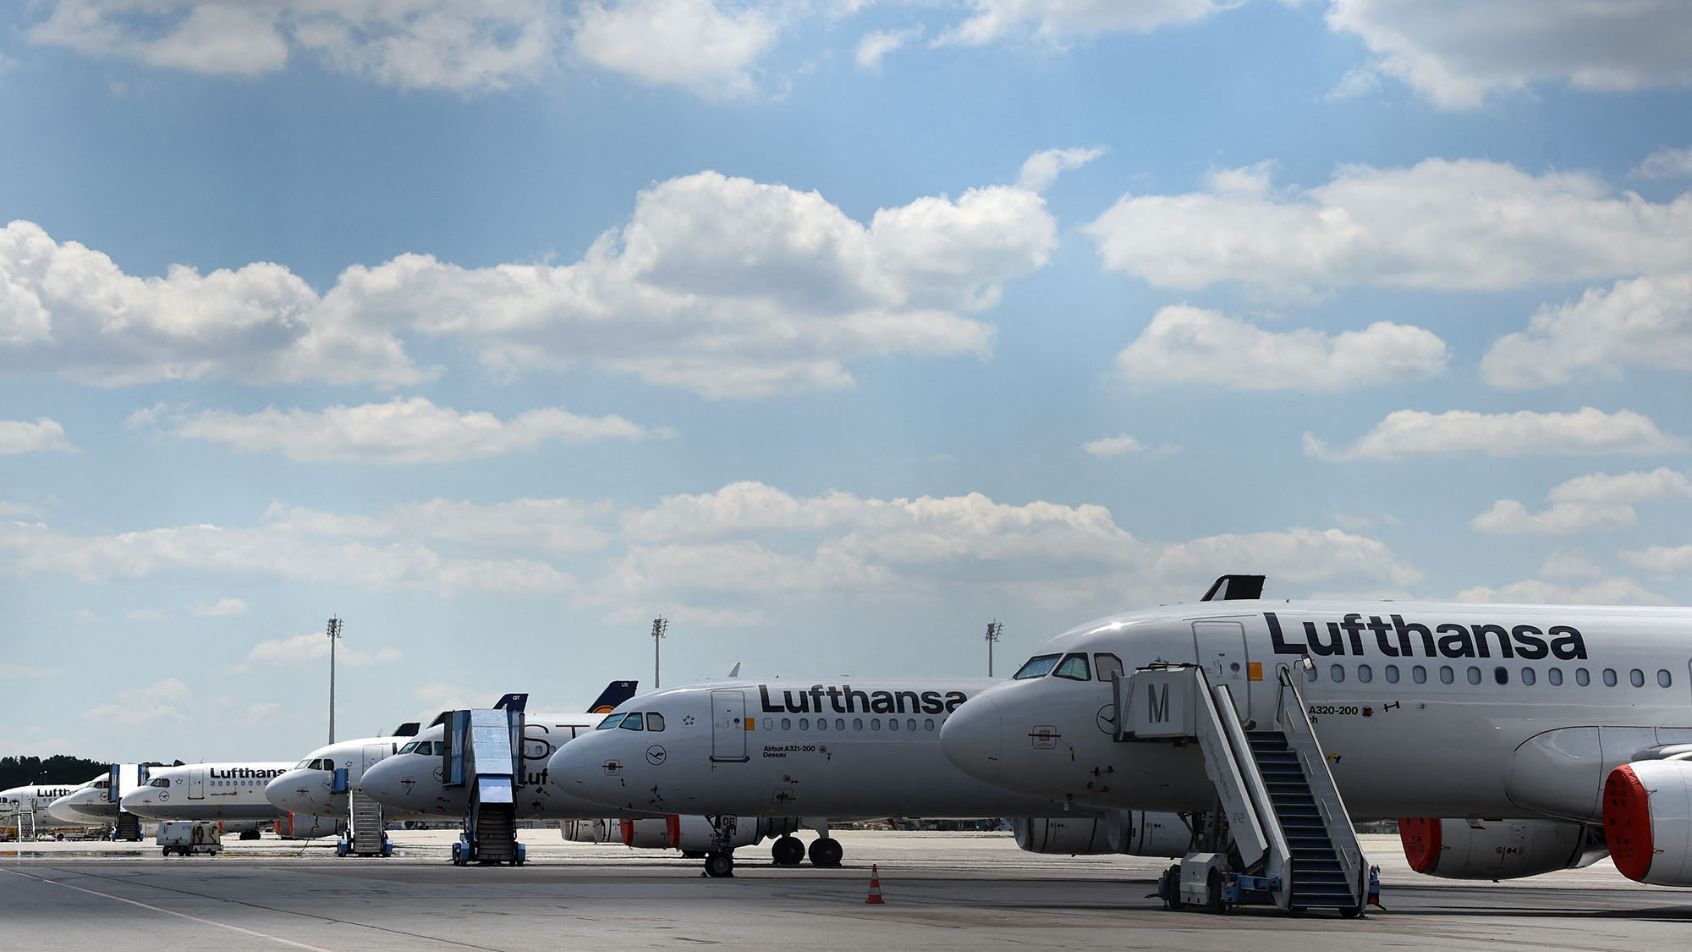 Planes of the German airline Lufthansa are parked at the "Franz-Josef-Strauss" airport in Munich, southern Germany, on May 27, 2020. - Coronavirus-stricken airline group Lufthansa wavered on May 27, 2020 on grabbing a nine-billion-euro ($9.9 billion) German state lifeline, throwing up new turbulence for a rescue that could decide the fate of the historic company. (Photo by Christof STACHE / AFP)